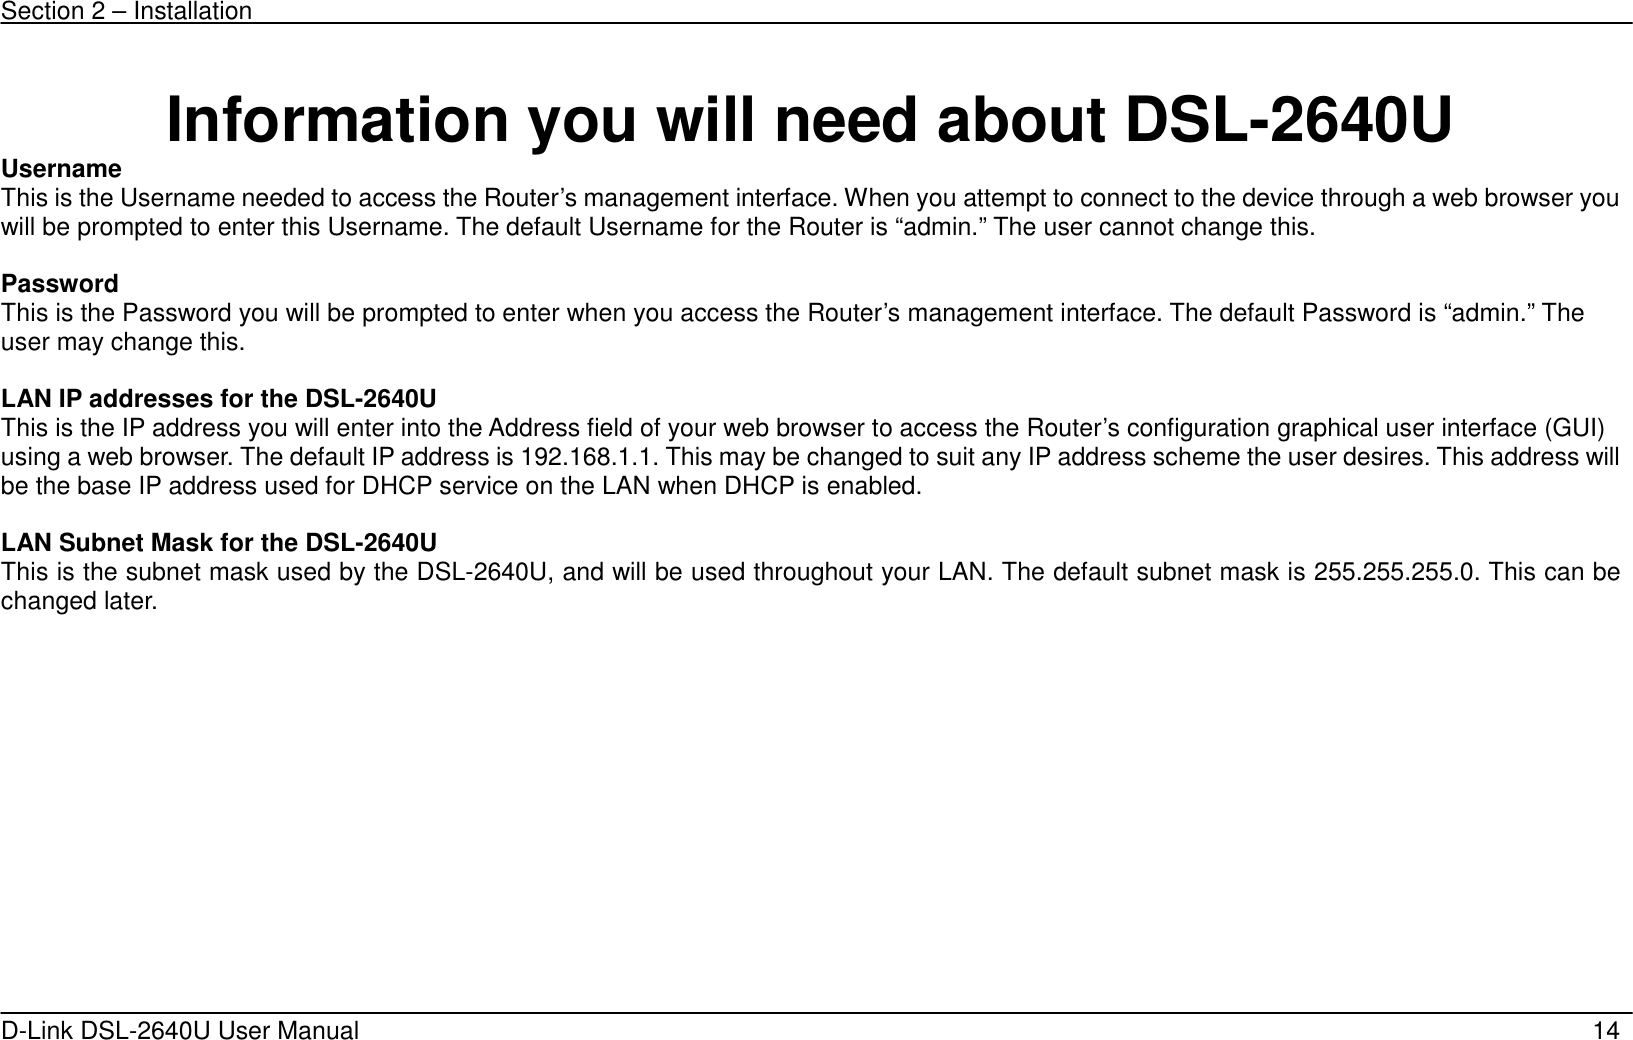 Section 2 – Installation   D-Link DSL-2640U User Manual    14  Information you will need about DSL-2640U Username  This is the Username needed to access the Router’s management interface. When you attempt to connect to the device through a web browser you will be prompted to enter this Username. The default Username for the Router is “admin.” The user cannot change this.  Password This is the Password you will be prompted to enter when you access the Router’s management interface. The default Password is “admin.” The user may change this.  LAN IP addresses for the DSL-2640U This is the IP address you will enter into the Address field of your web browser to access the Router’s configuration graphical user interface (GUI) using a web browser. The default IP address is 192.168.1.1. This may be changed to suit any IP address scheme the user desires. This address will be the base IP address used for DHCP service on the LAN when DHCP is enabled.  LAN Subnet Mask for the DSL-2640U This is the subnet mask used by the DSL-2640U, and will be used throughout your LAN. The default subnet mask is 255.255.255.0. This can be changed later.   